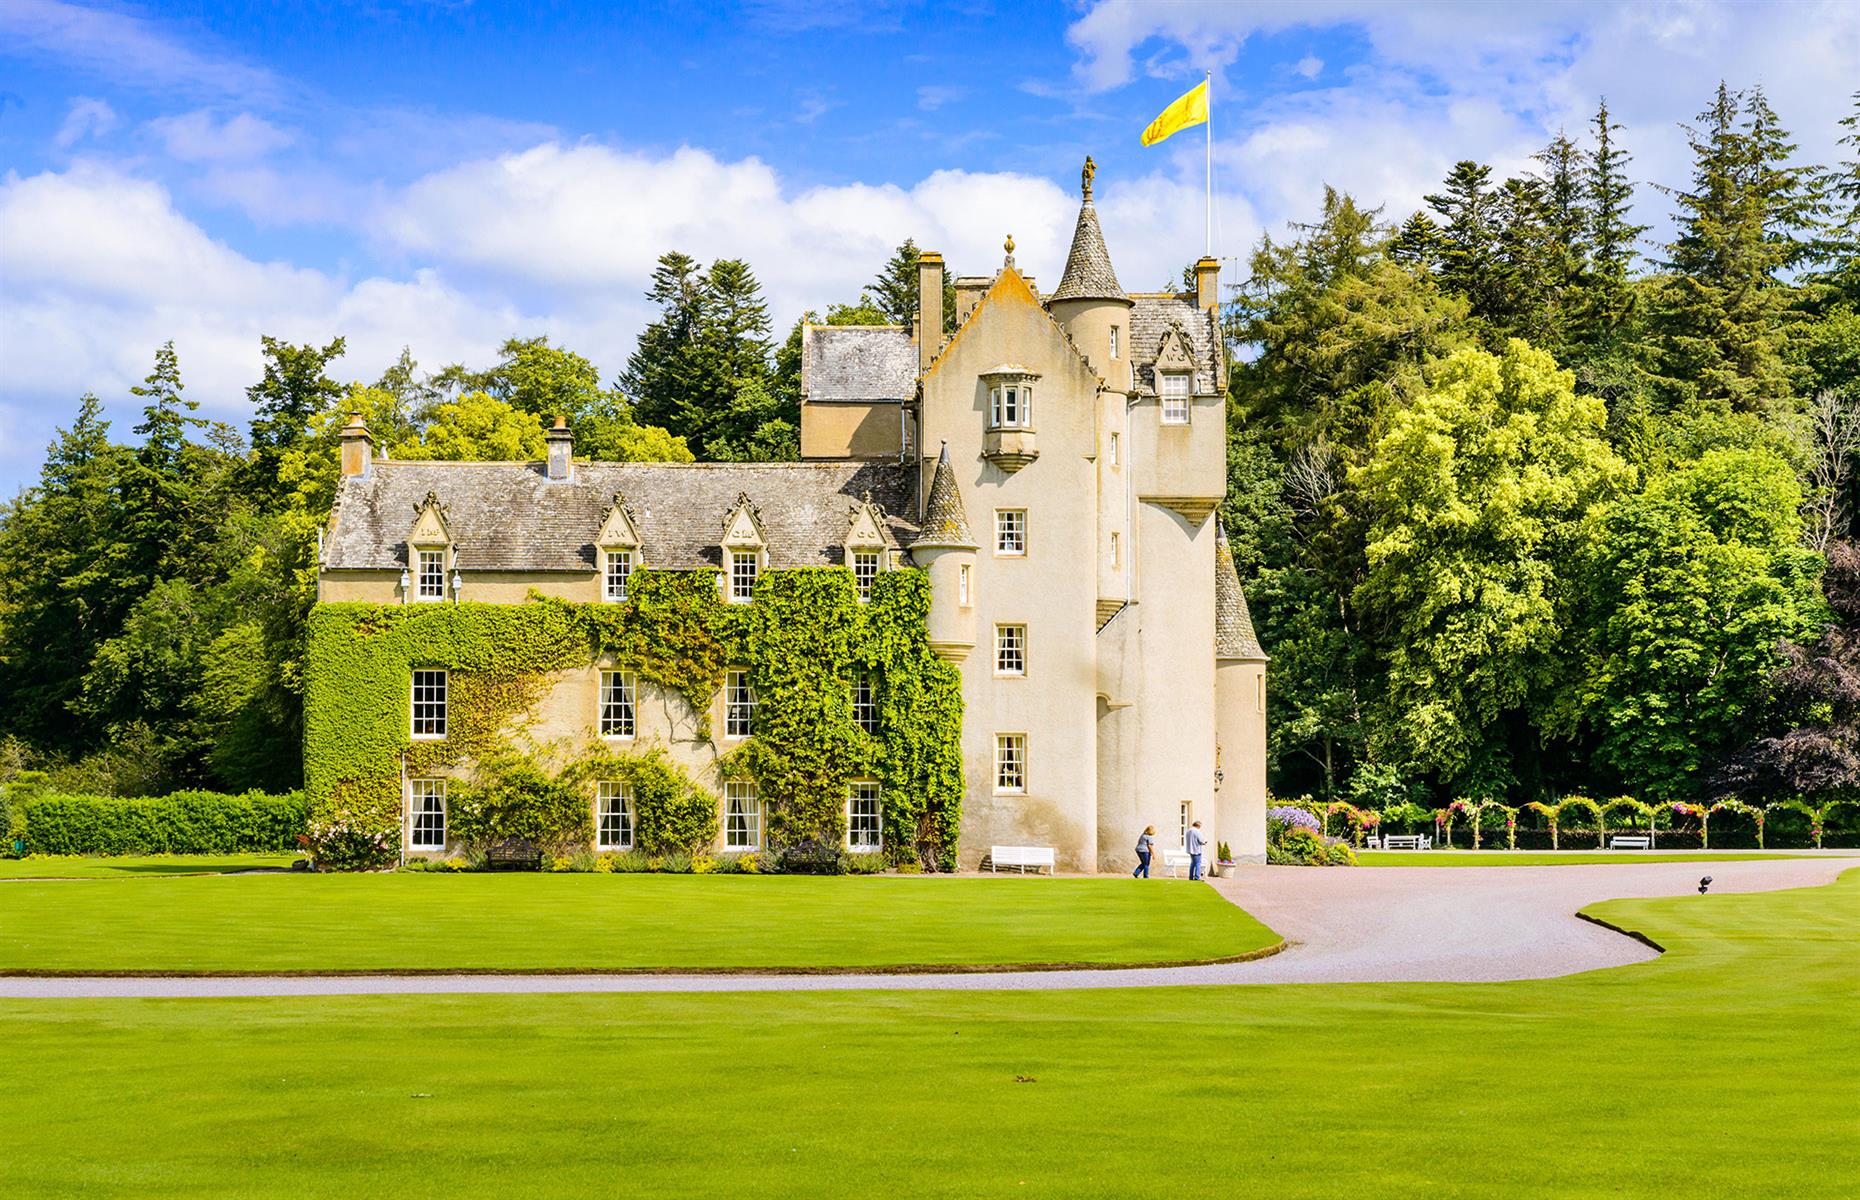 <p><a href="https://www.loveexploring.com/news/84965/what-to-see-and-do-where-to-stay-in-aberdeenshire">Aberdeenshire</a> is known as castle country – they are seemingly everywhere – which is why fortresses such as this often get overlooked. In the heart of Scotland's single malt whisky region of Speyside, <a href="https://www.ballindallochcastle.co.uk/">Ballindalloch</a>, whose oldest part dates from the 16th century, is still a family home and has been developed by successive members of the Macpherson-Grant family over the years to become a bona fide Scottish Baronial palace.</p>